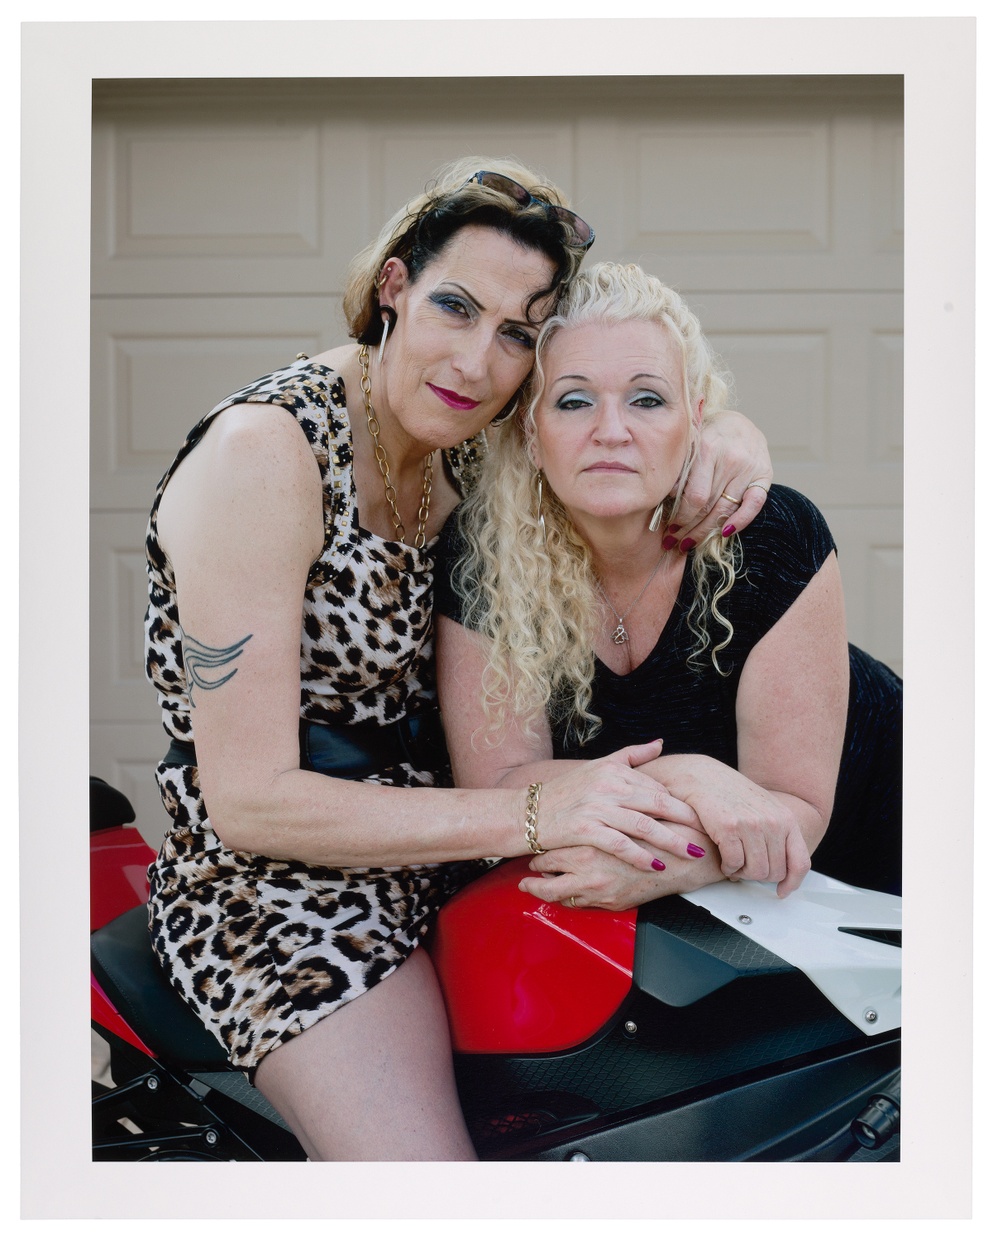 A photograph of two light-skinned people wearing dresses and heavy eye makeup embracing each other and leaning over a red and black motorcycle. 